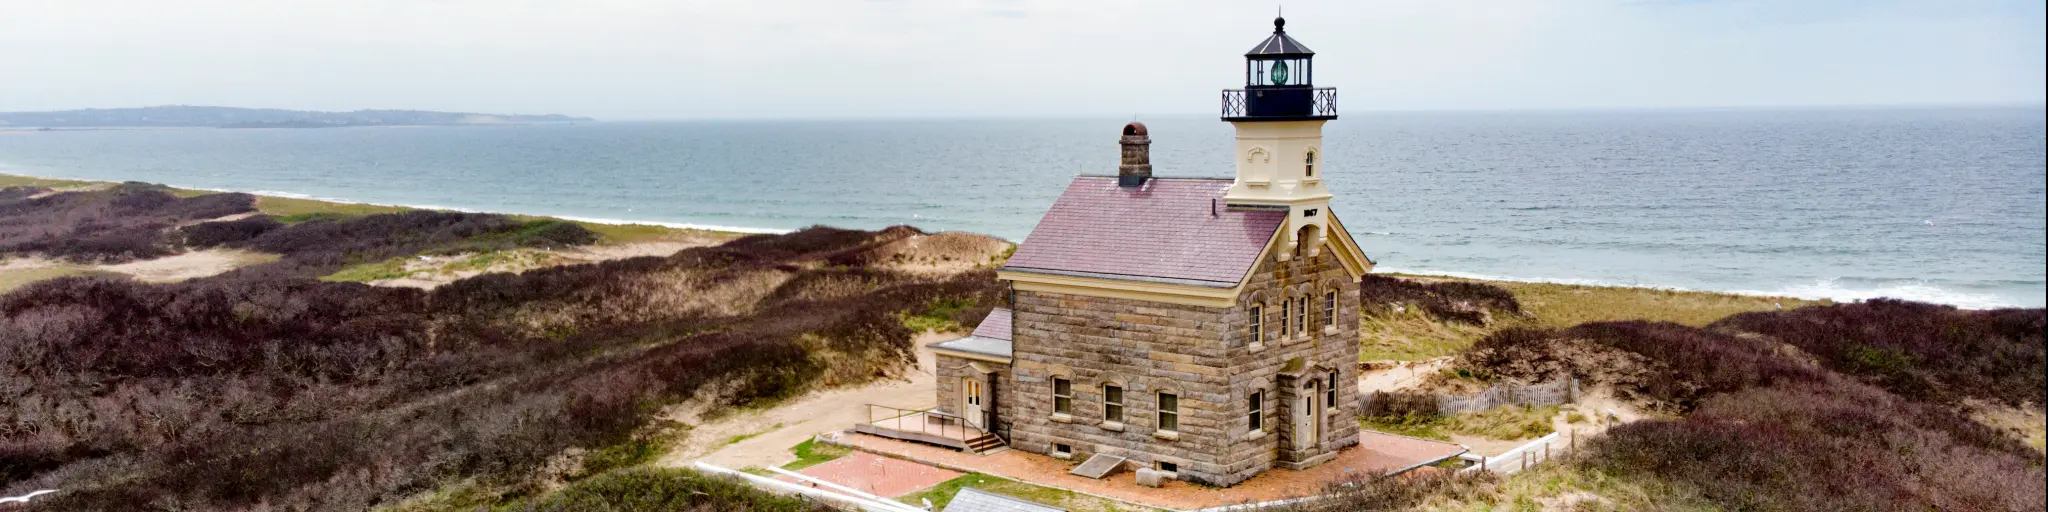 Classic lighthouse building looking out to sea on Block Island, Rhode Island.